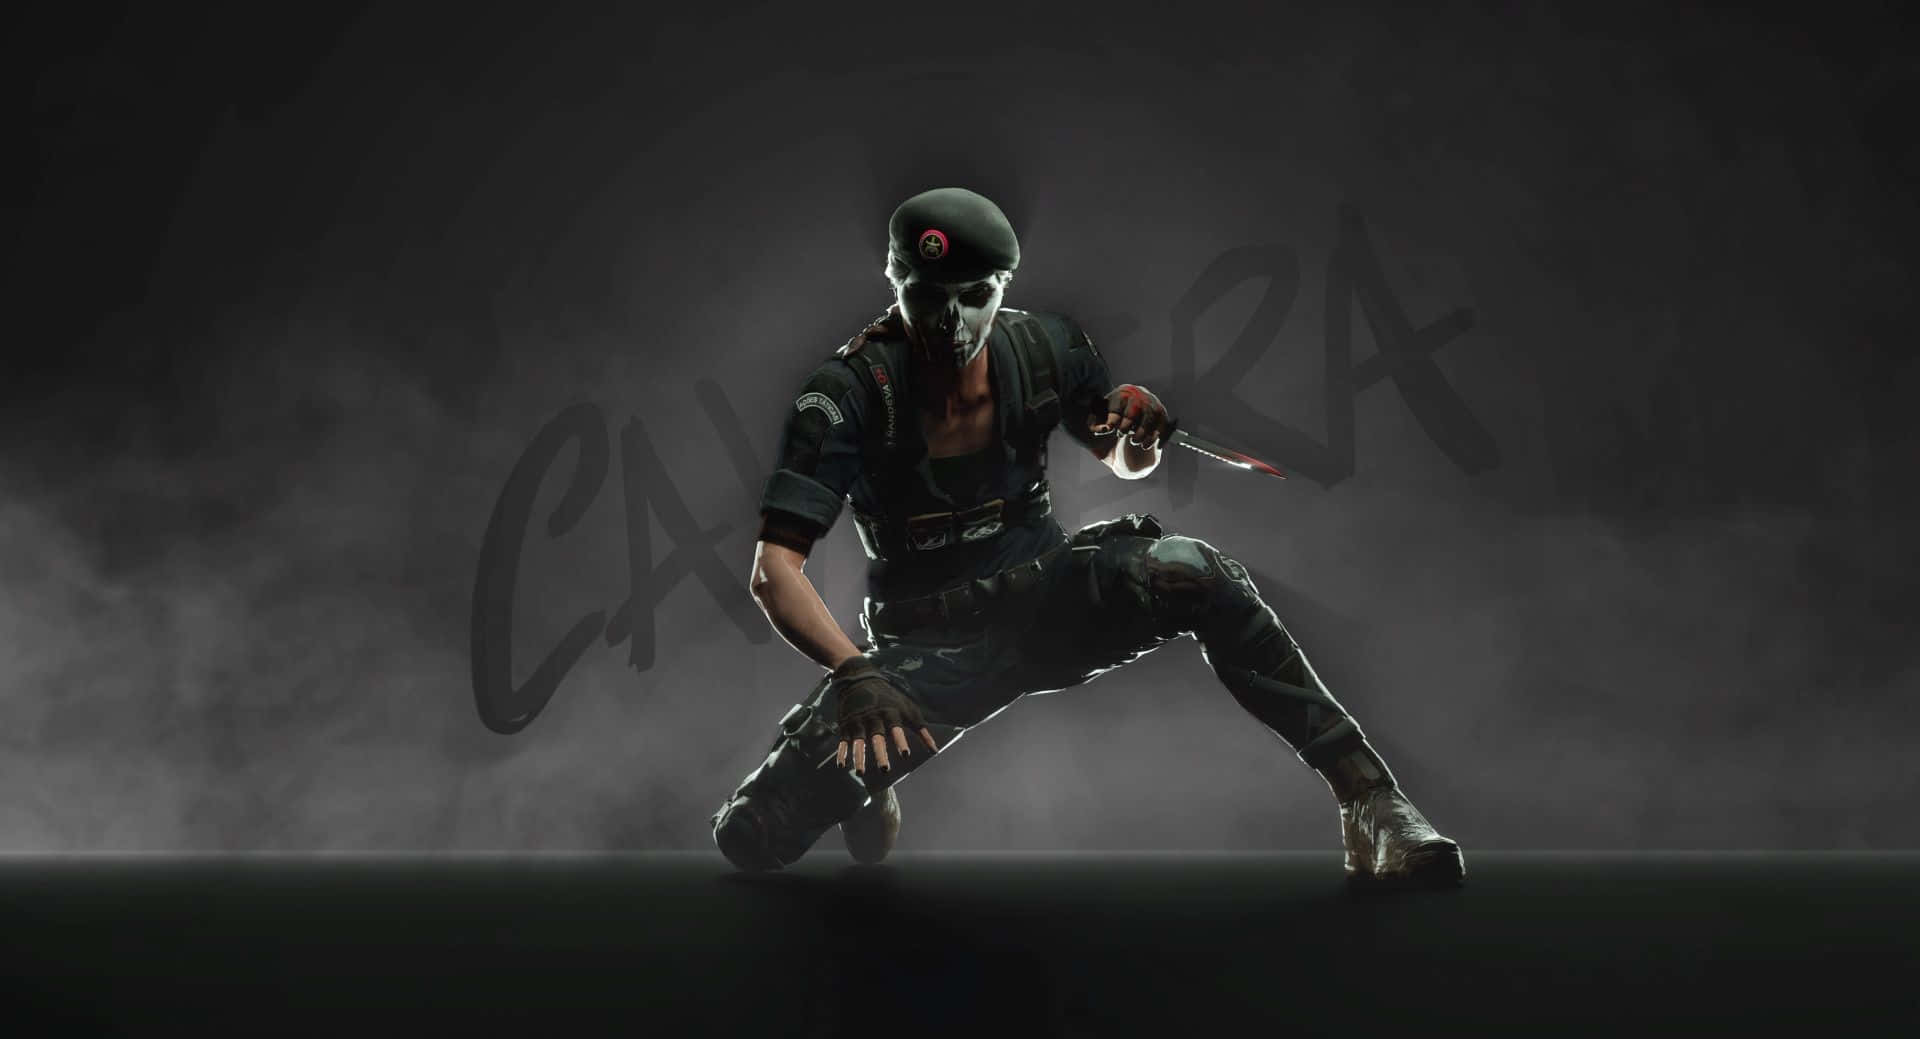 Stealthy Caveira in Action on Rainbow Six Siege Wallpaper